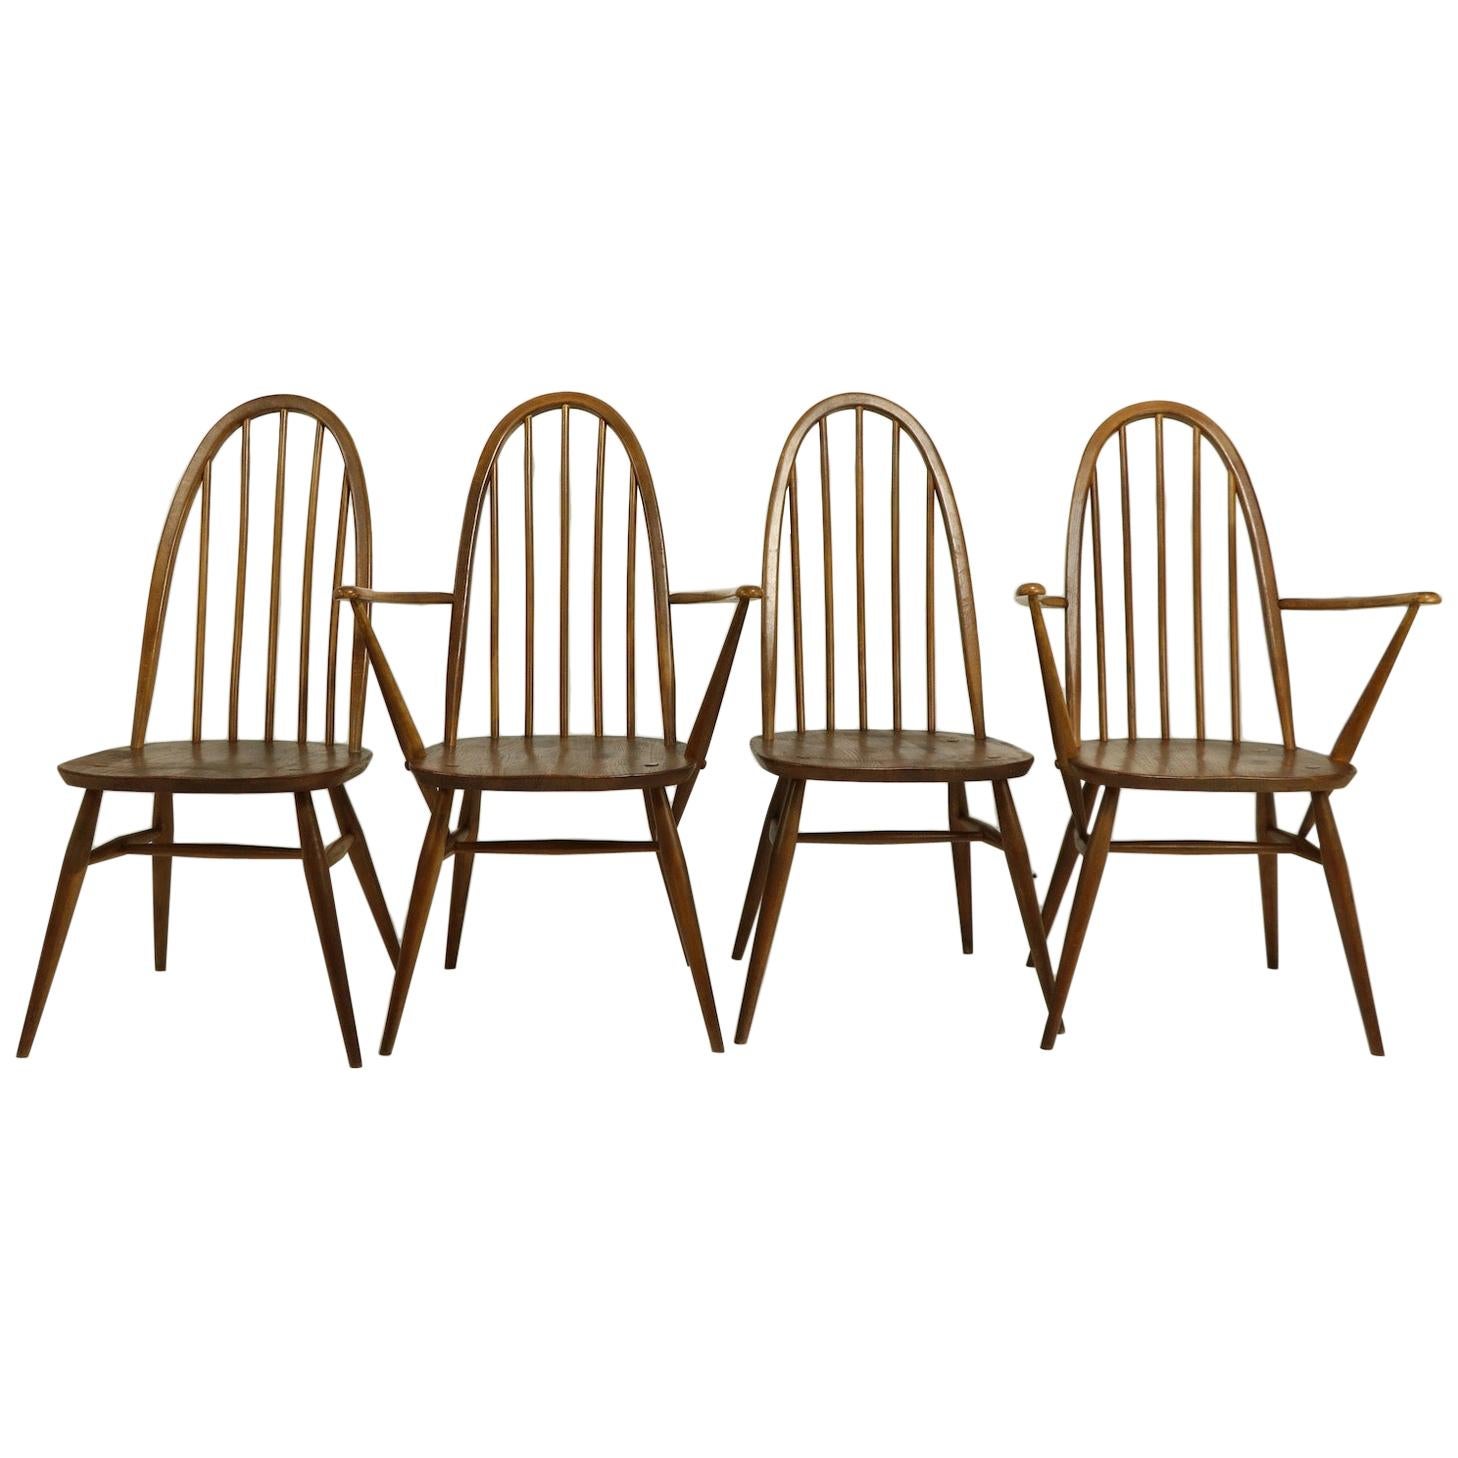 Set of 4 Dining Chairs by Lucien Ercolani for Ercol, England